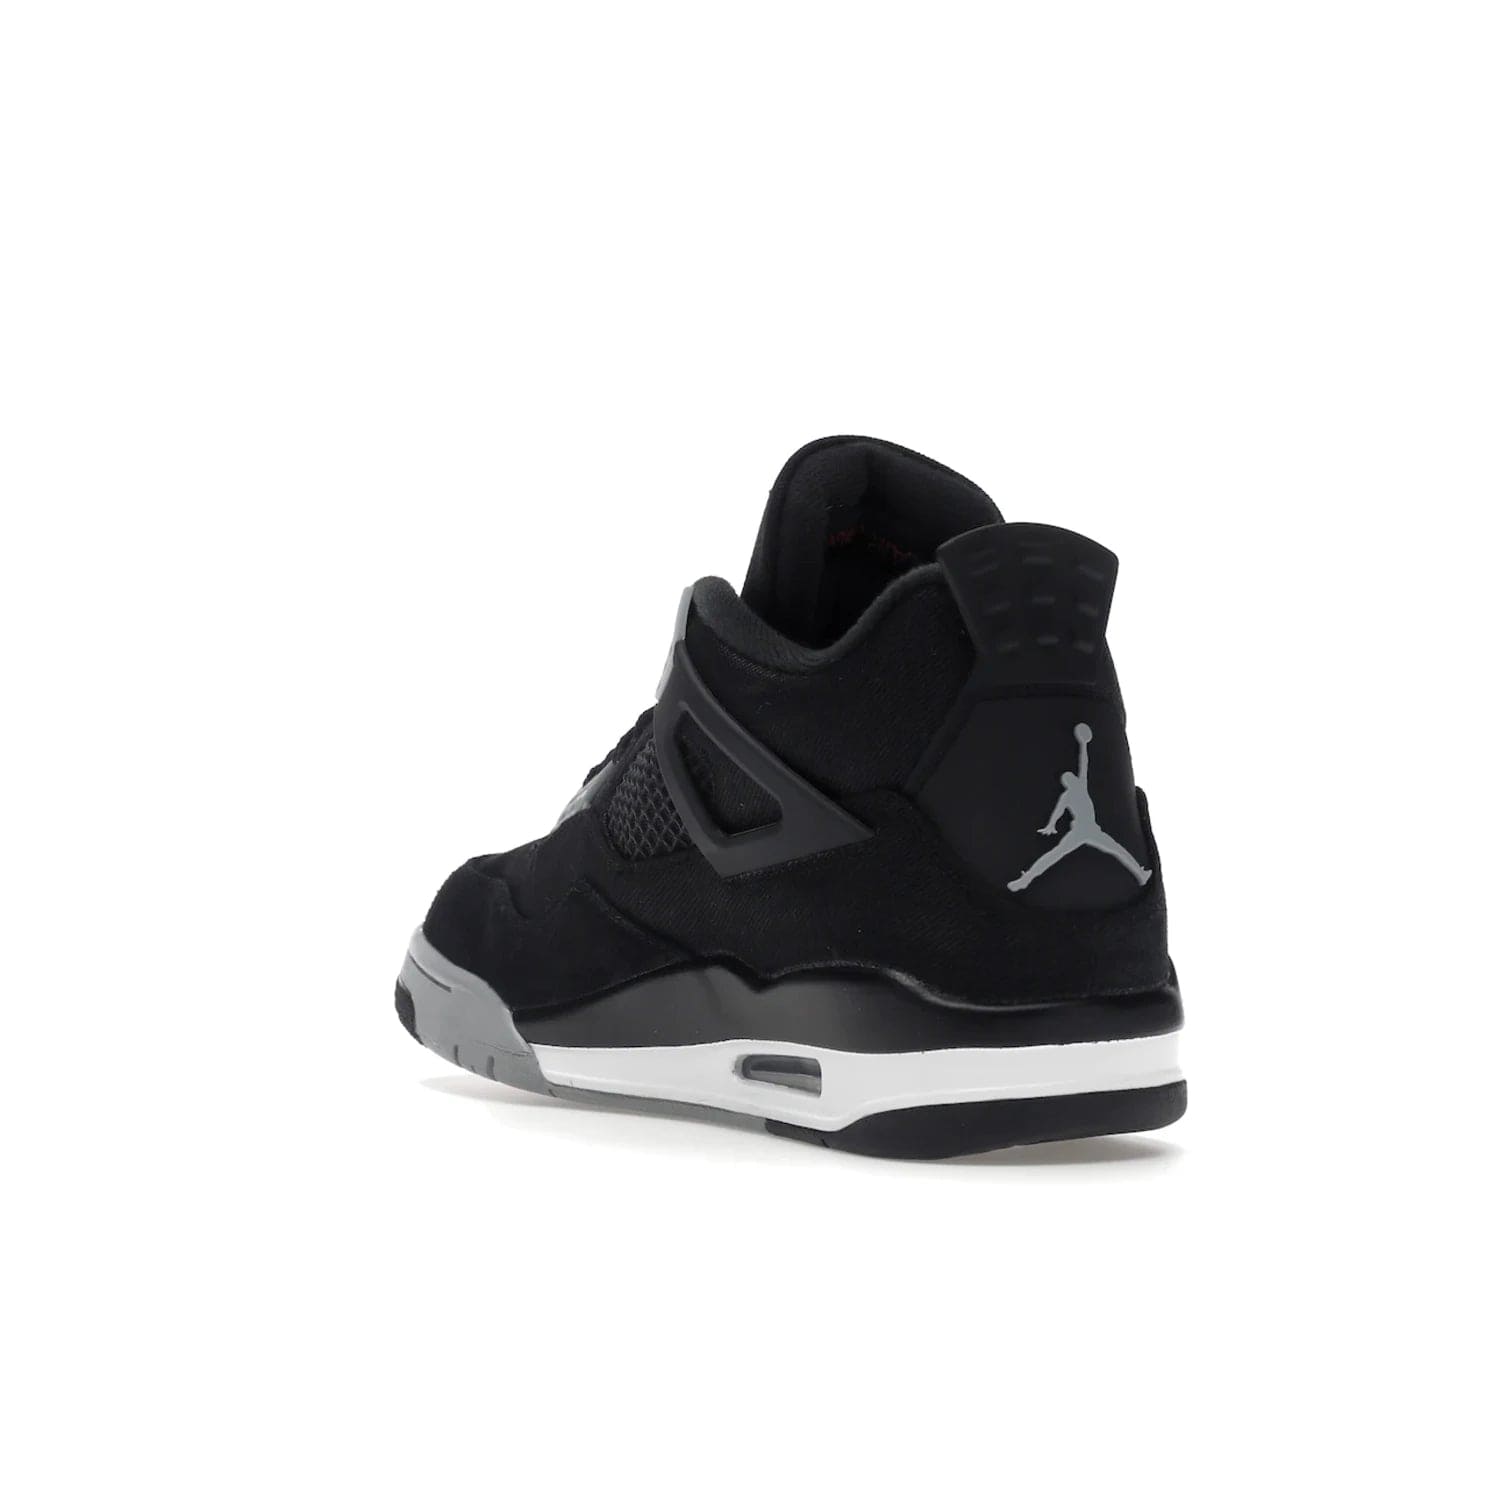 Jordan 4 Retro SE Black Canvas - Image 25 - Only at www.BallersClubKickz.com - The Air Jordan 4 Retro SE Black Canvas brings timeless style and modern luxury. Classic mid-top sneaker in black canvas and grey suede with tonal Jumpman logo, Flight logo and polyurethane midsole with visible Air-sole cushioning. Refresh your sneaker collection and rock the Air Jordan 4 Retro SE Black Canvas.